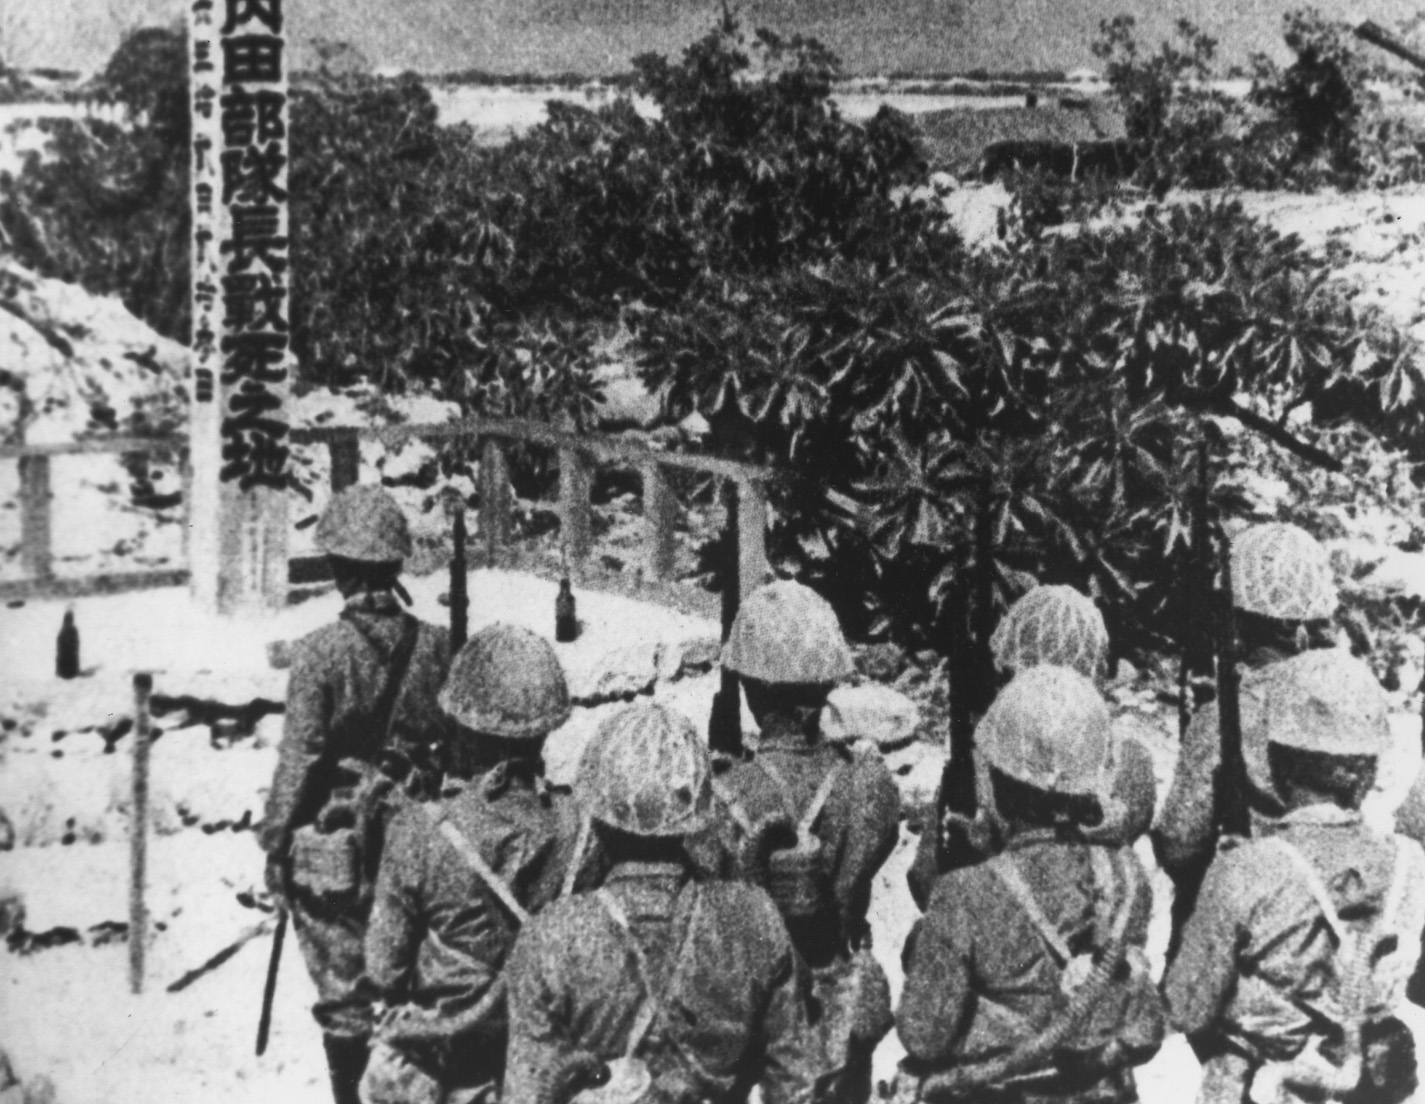 Japanese troops pay their last respects to a fallen comrade killed in action on Wake Island. In retribution for their fallen colleagues the Japanese would behead 5 American POWs.